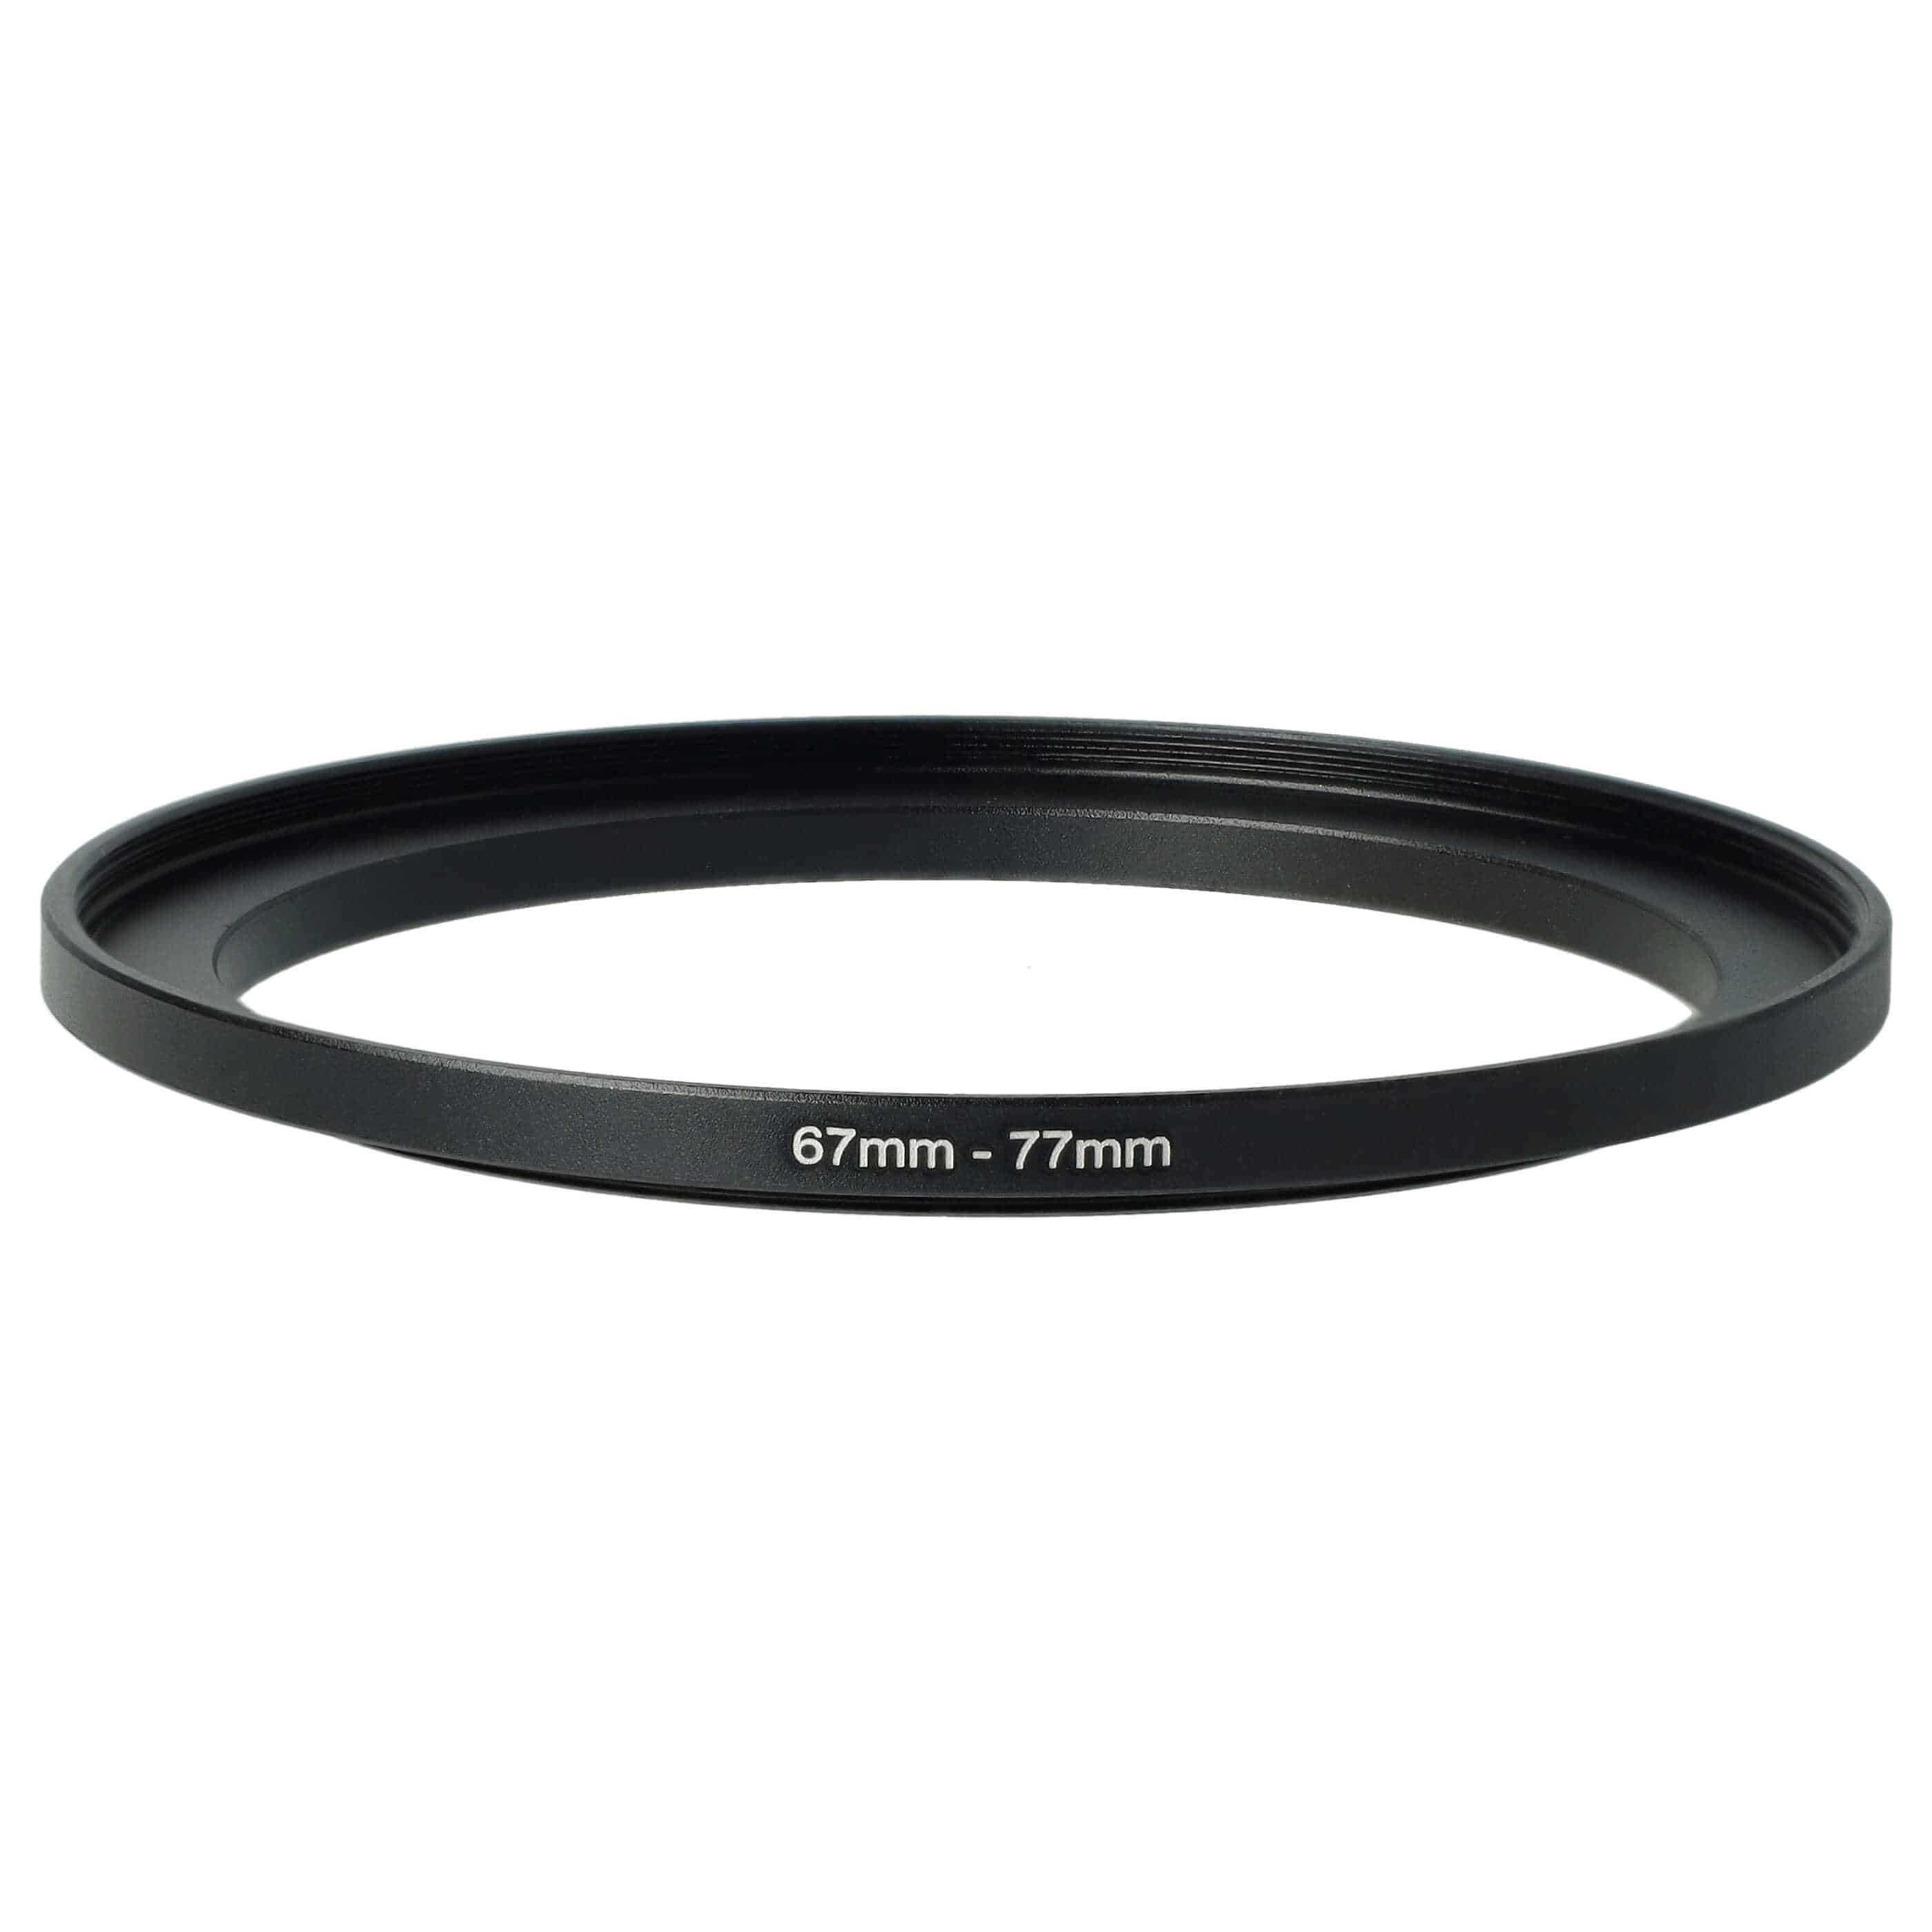 Step-Up Ring Adapter of 67 mm to 77 mmfor various Camera Lens - Filter Adapter